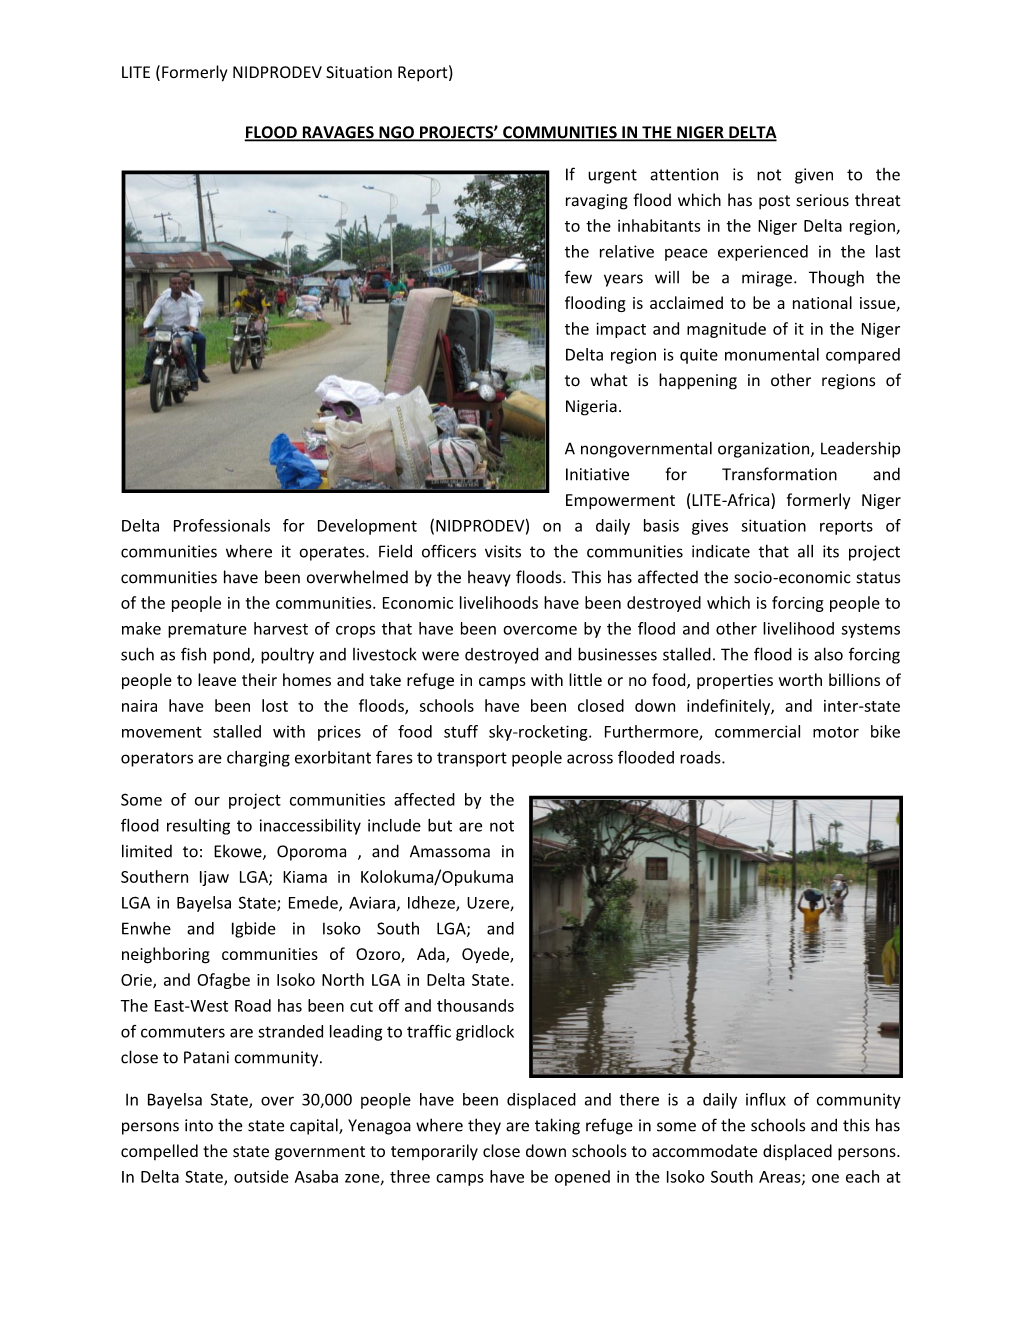 (Formerly NIDPRODEV Situation Report) FLOOD RAVAGES NGO PROJECTS' COMMUNITIES in the NIGER DELTA If Urgent Attention Is N